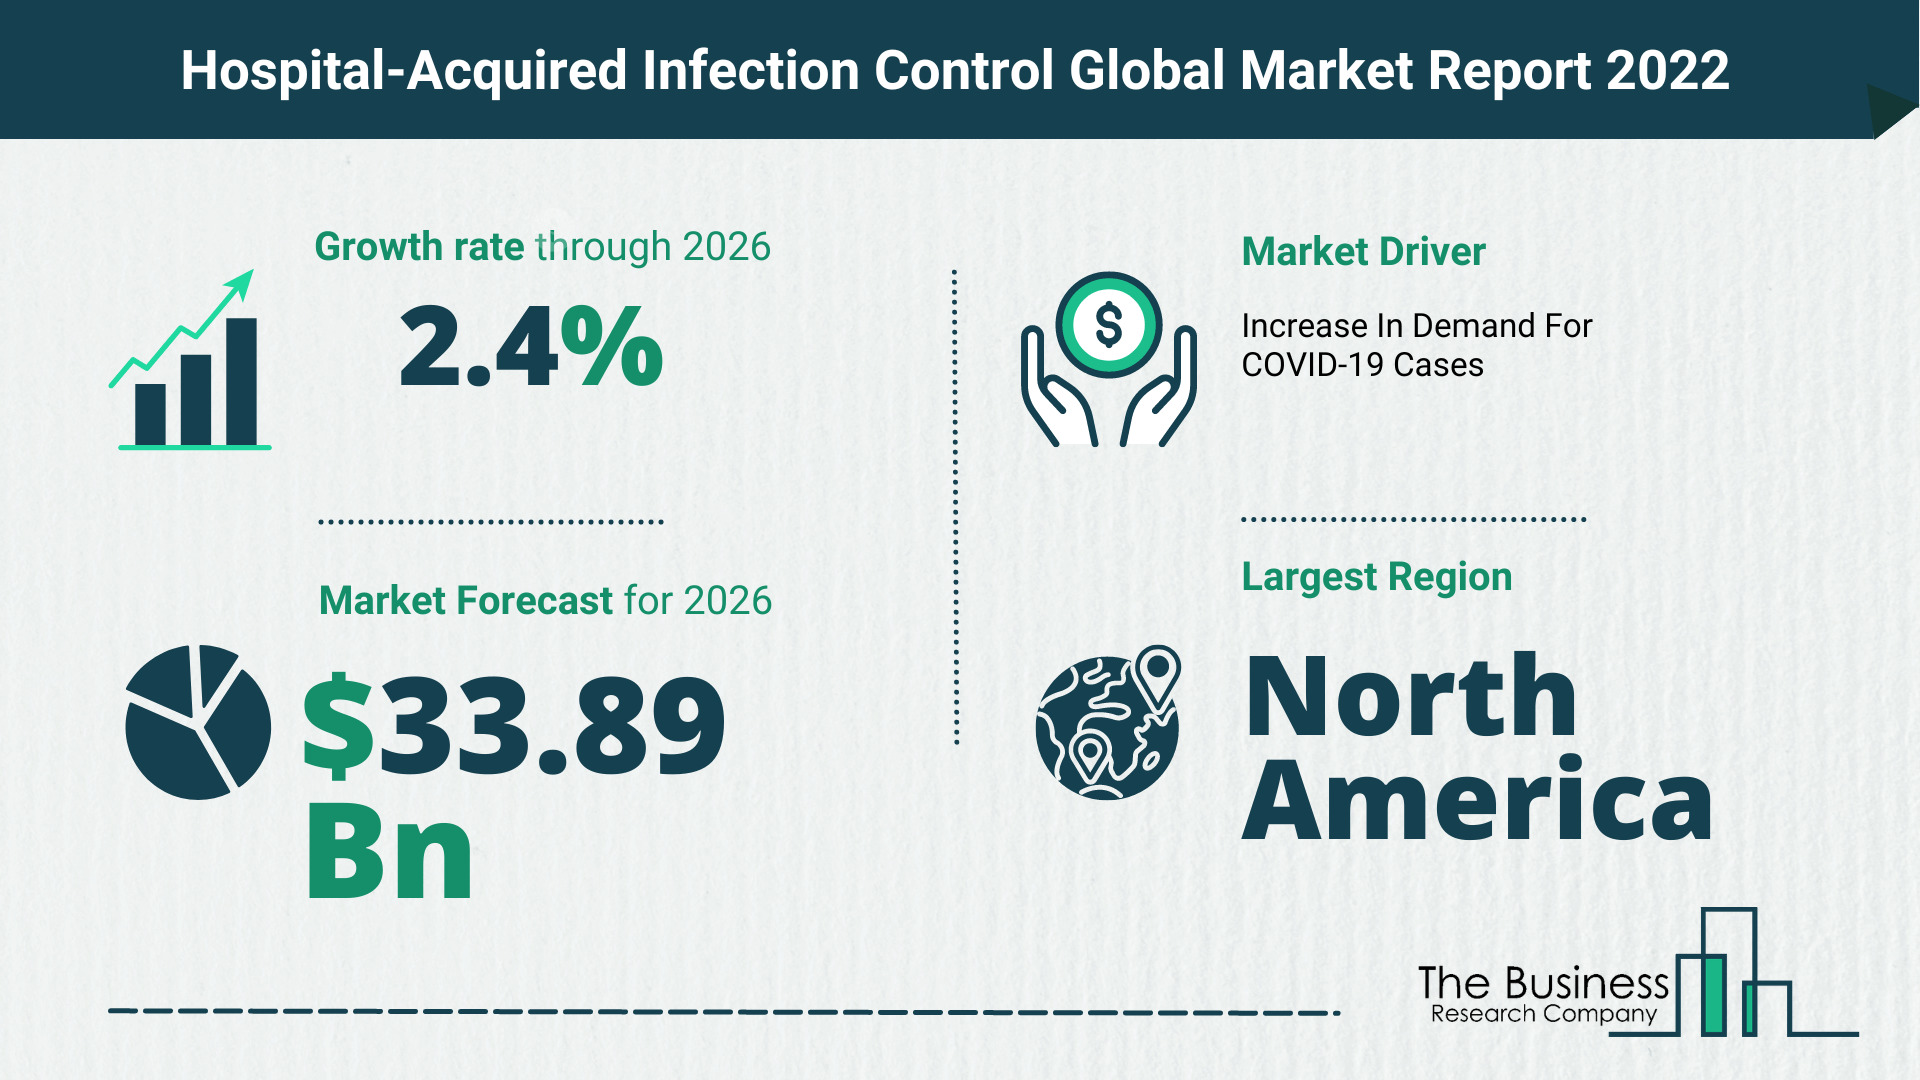 Global Hospital-Acquired Infection Control Market